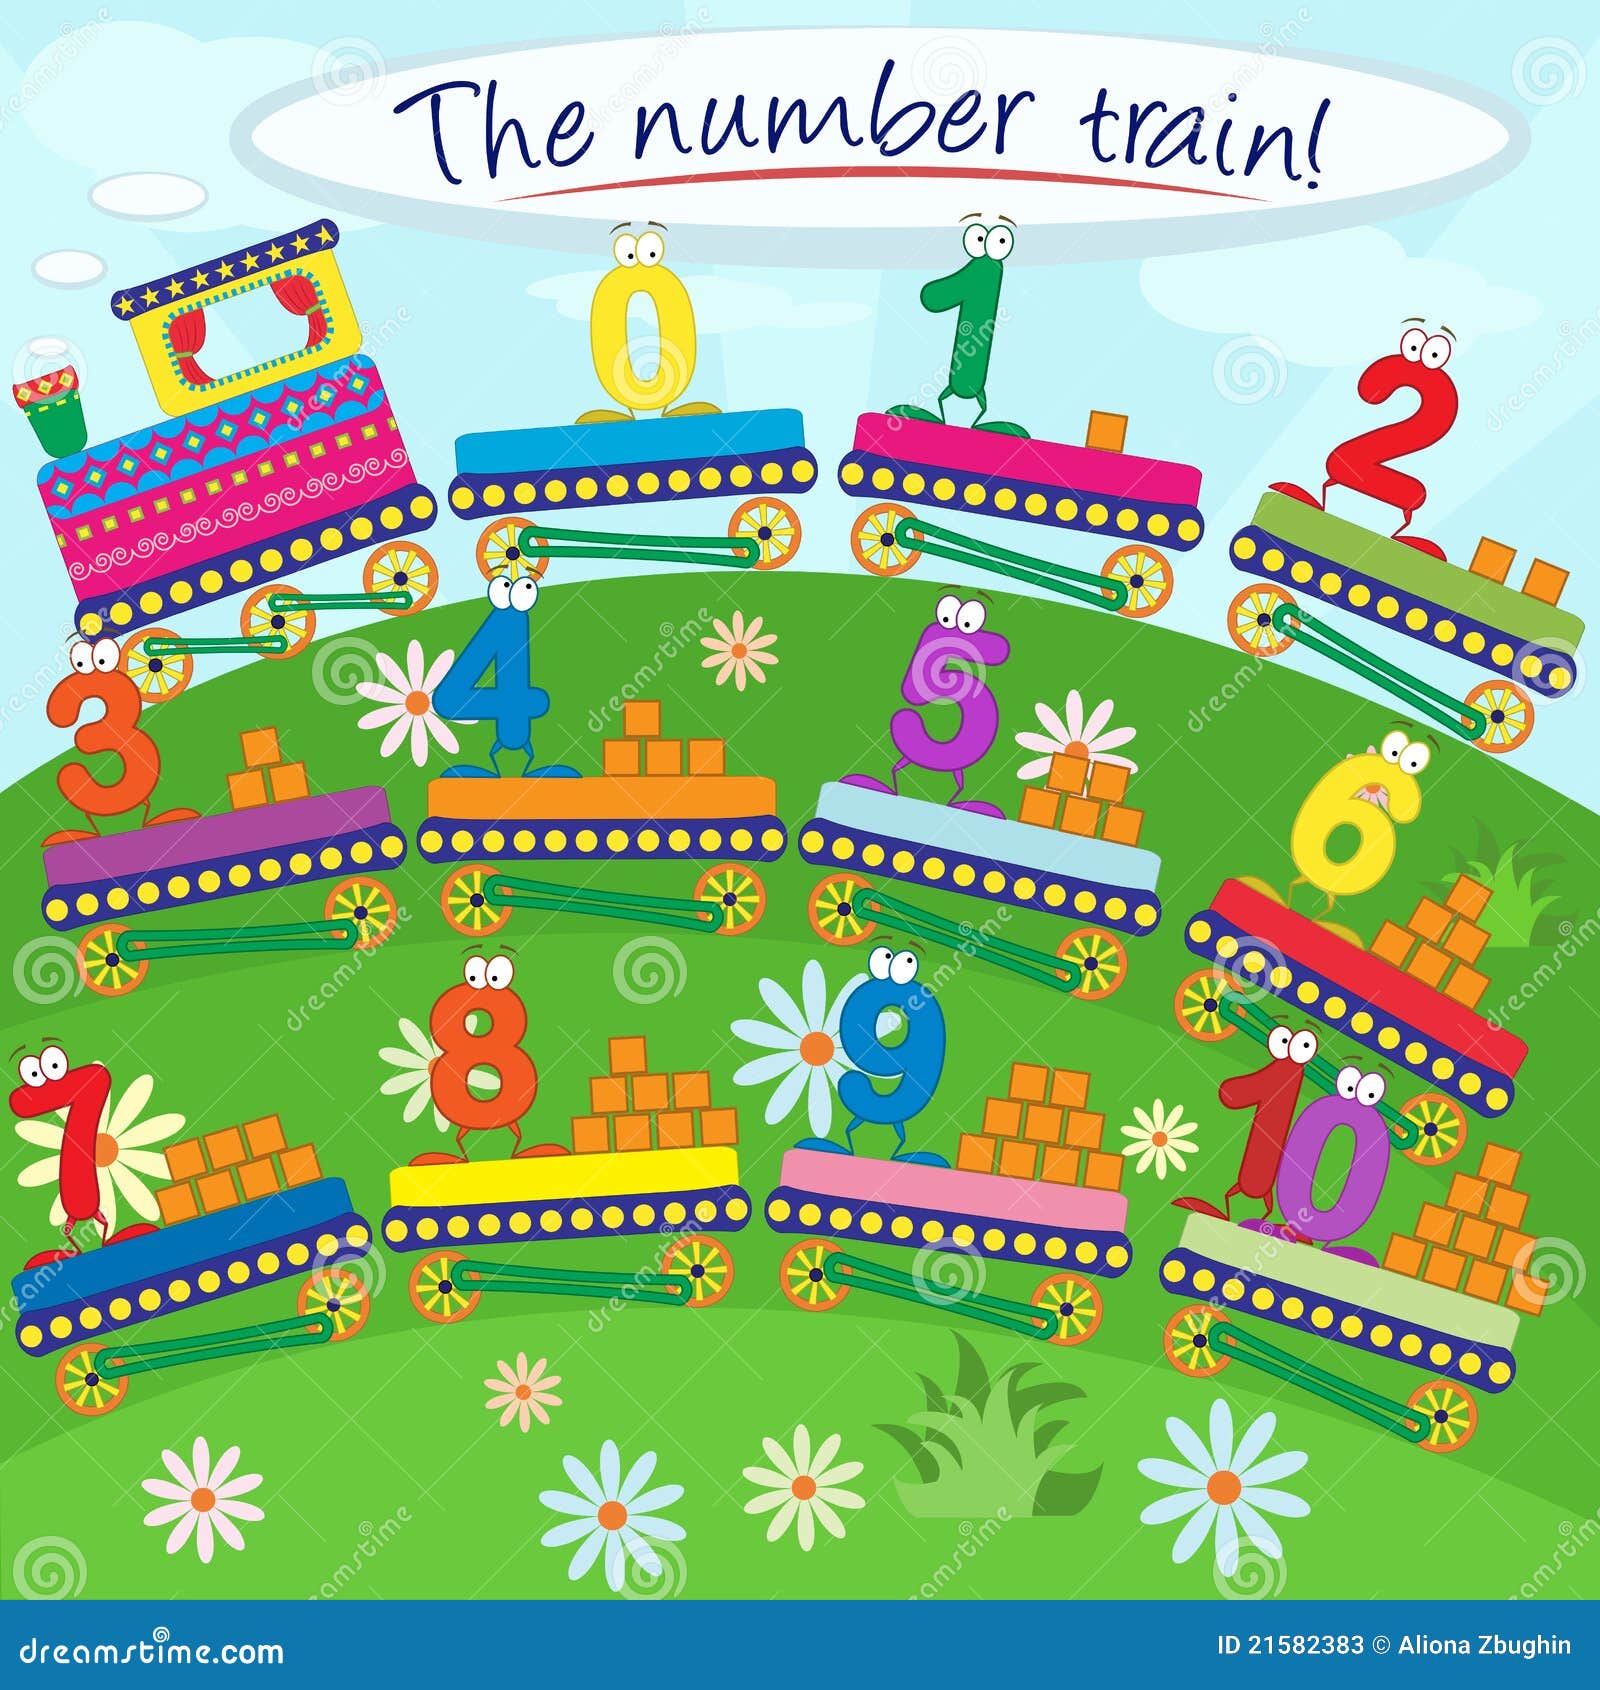 the number train